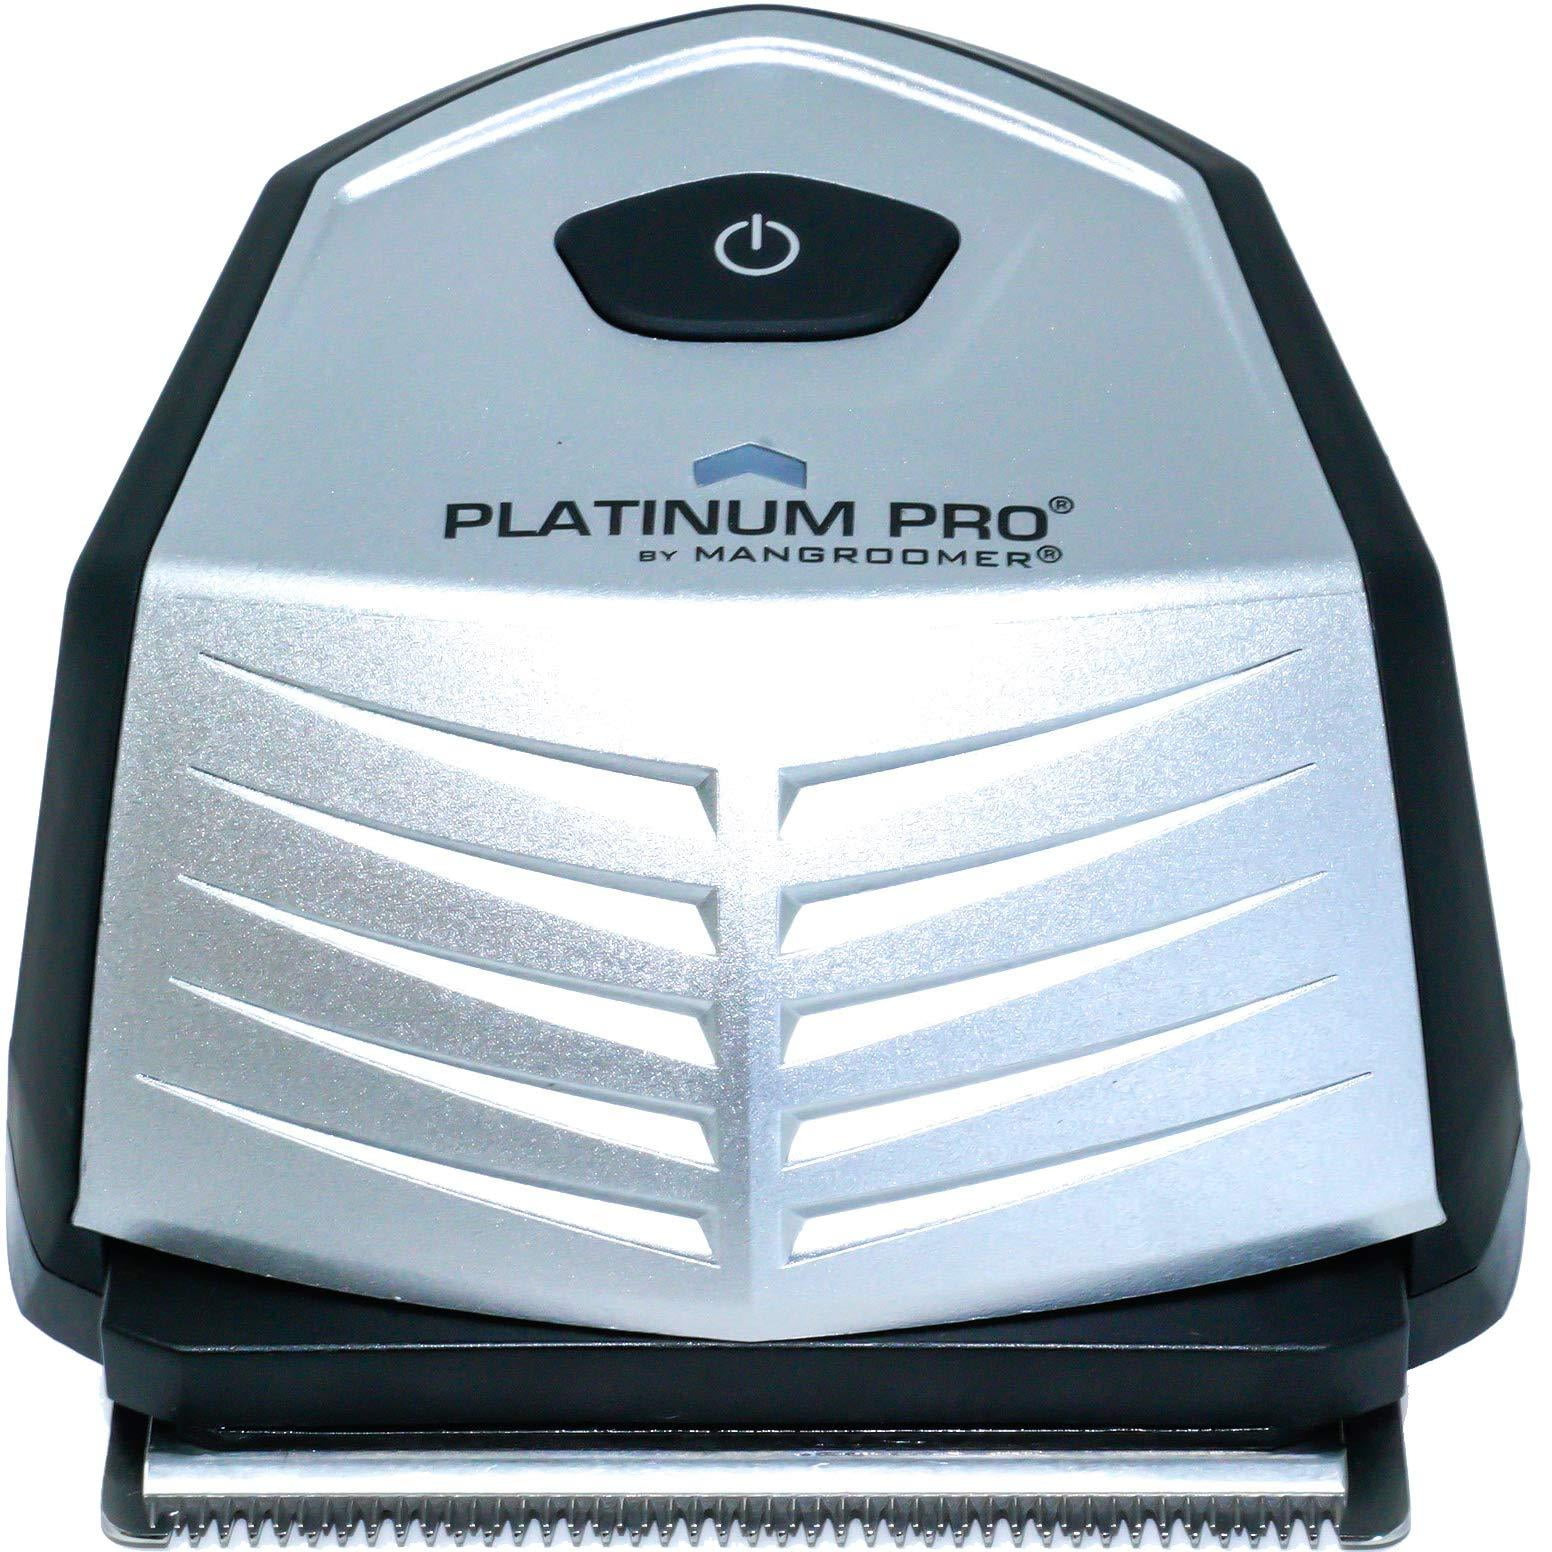 PLATINUM PRO by MANGROOMER - New Self-Haircut Kit and Advanced Hair Clippers With Lithium MAX Battery, 9 Length Guards and included Bonus Storage Case!